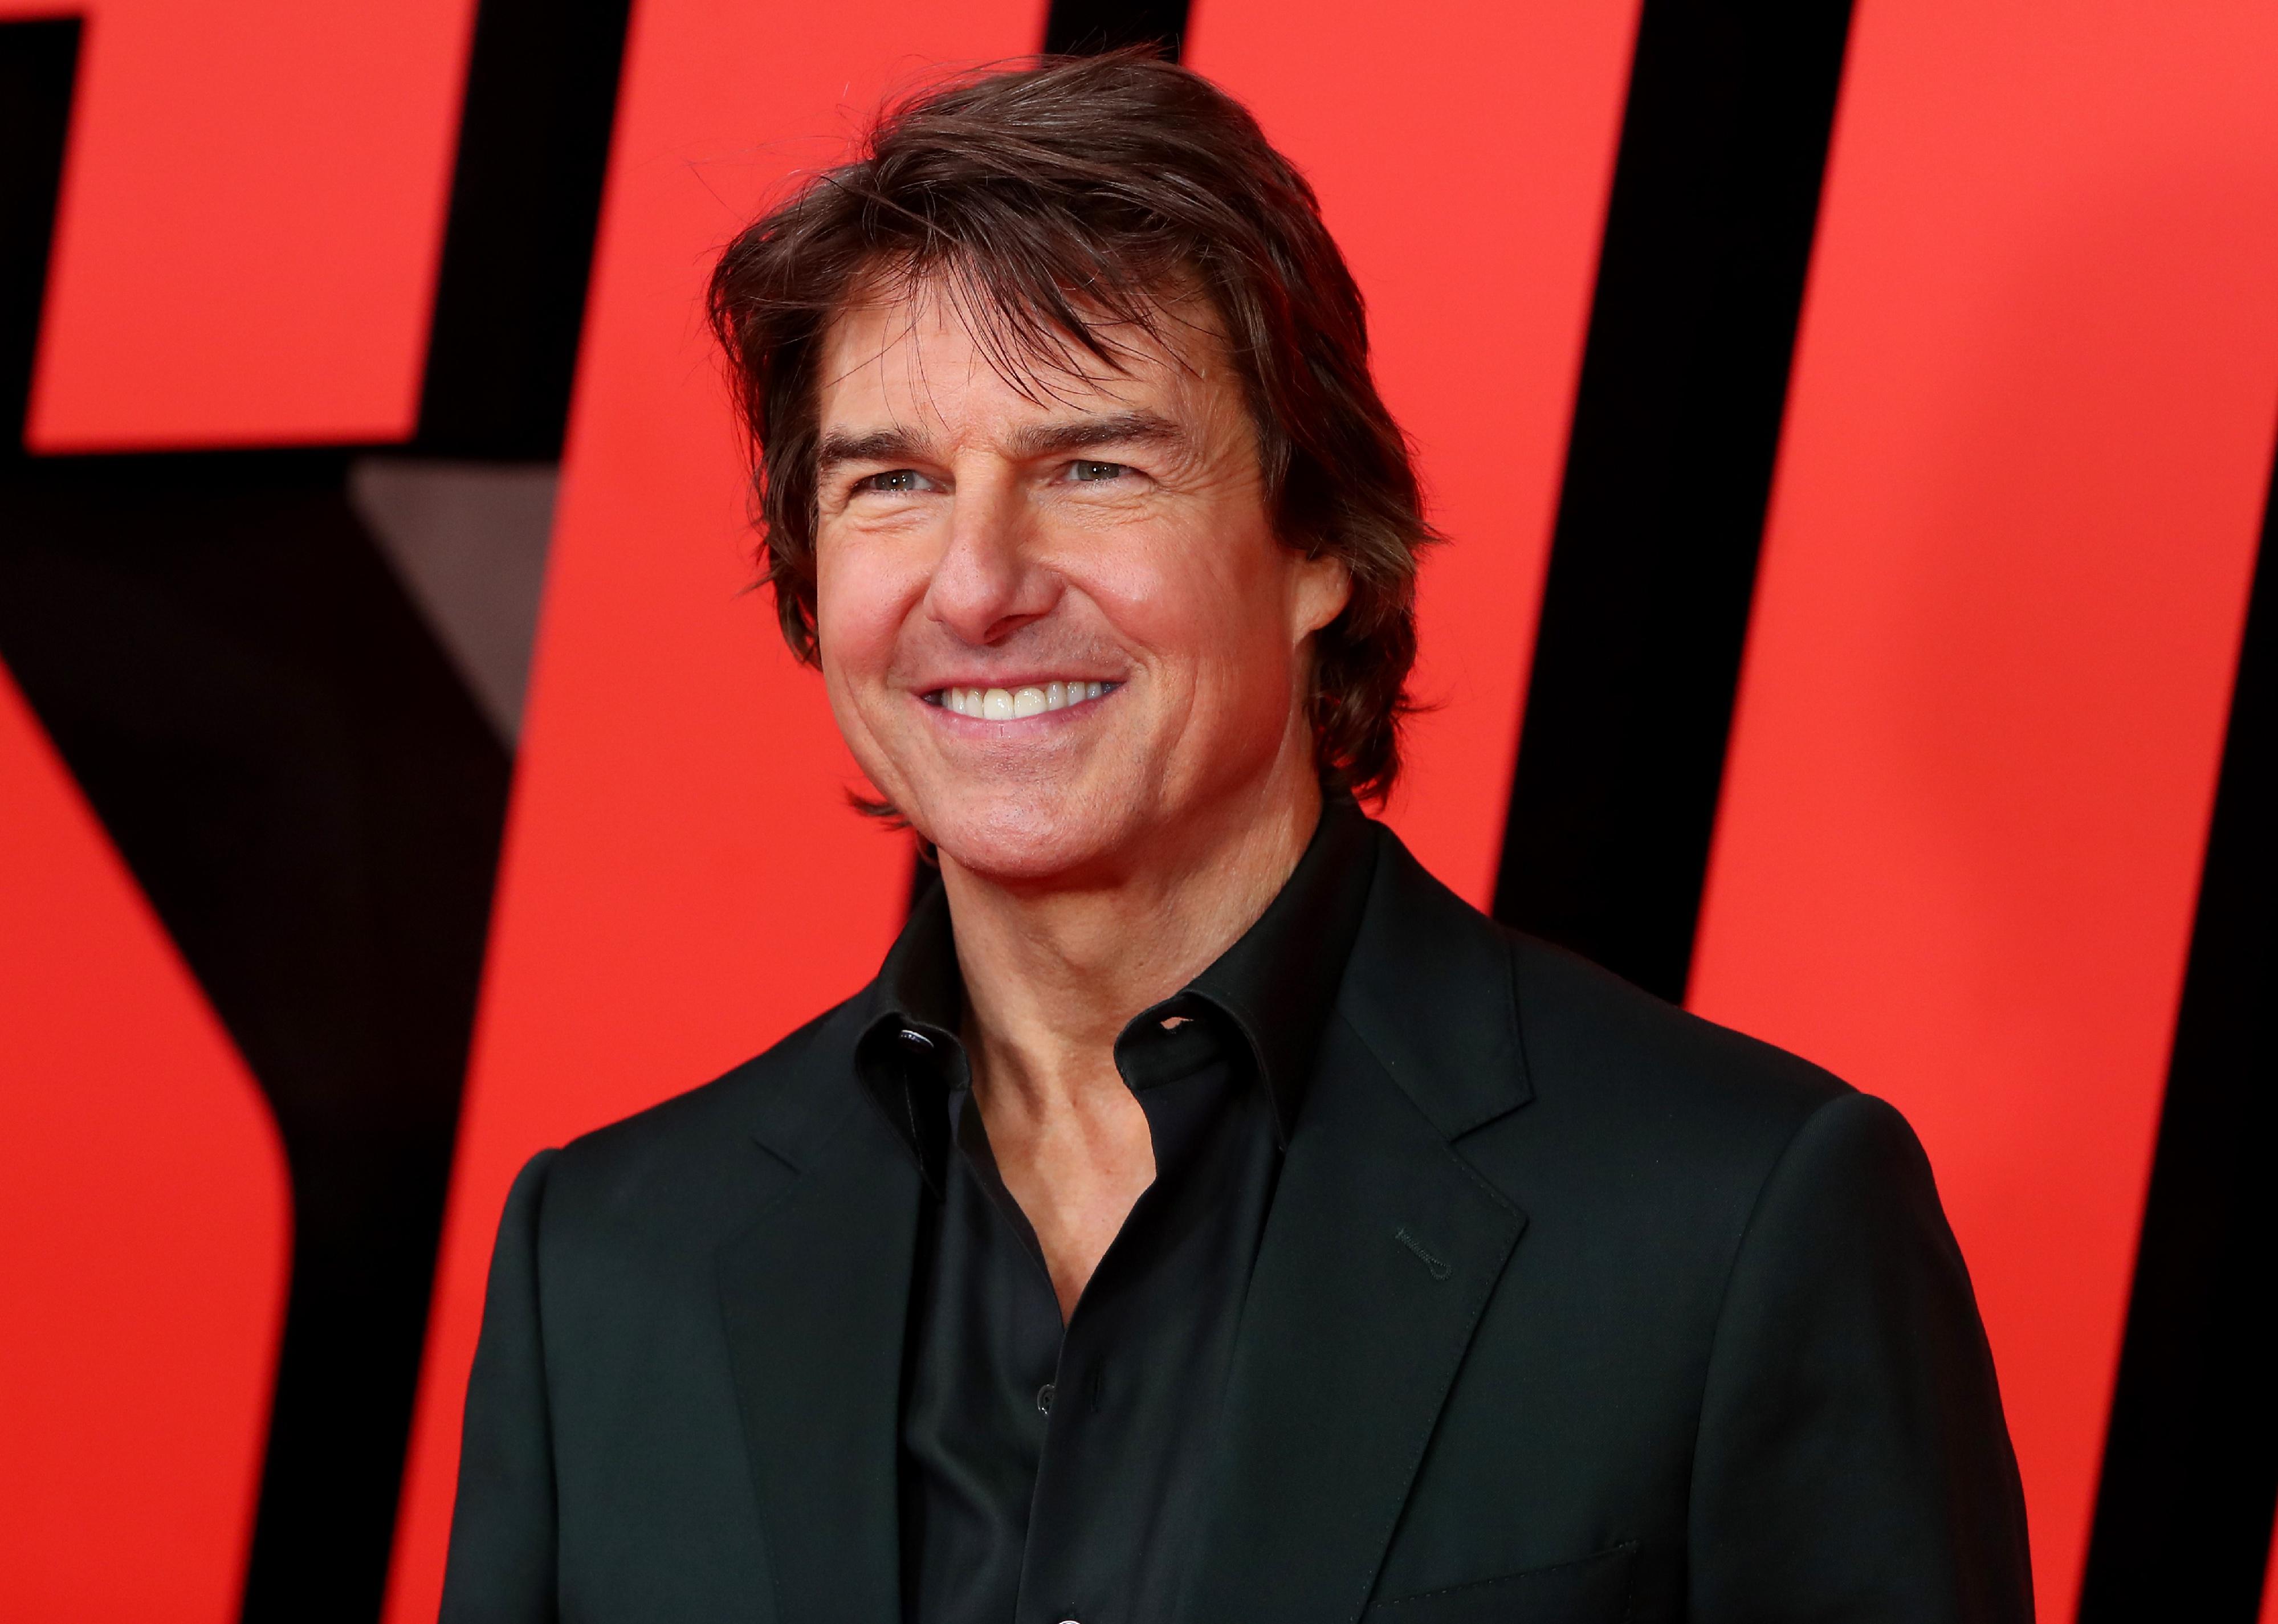 Tom Cruise attends the Australian premiere of "Mission: Impossible - Dead Reckoning Part One".